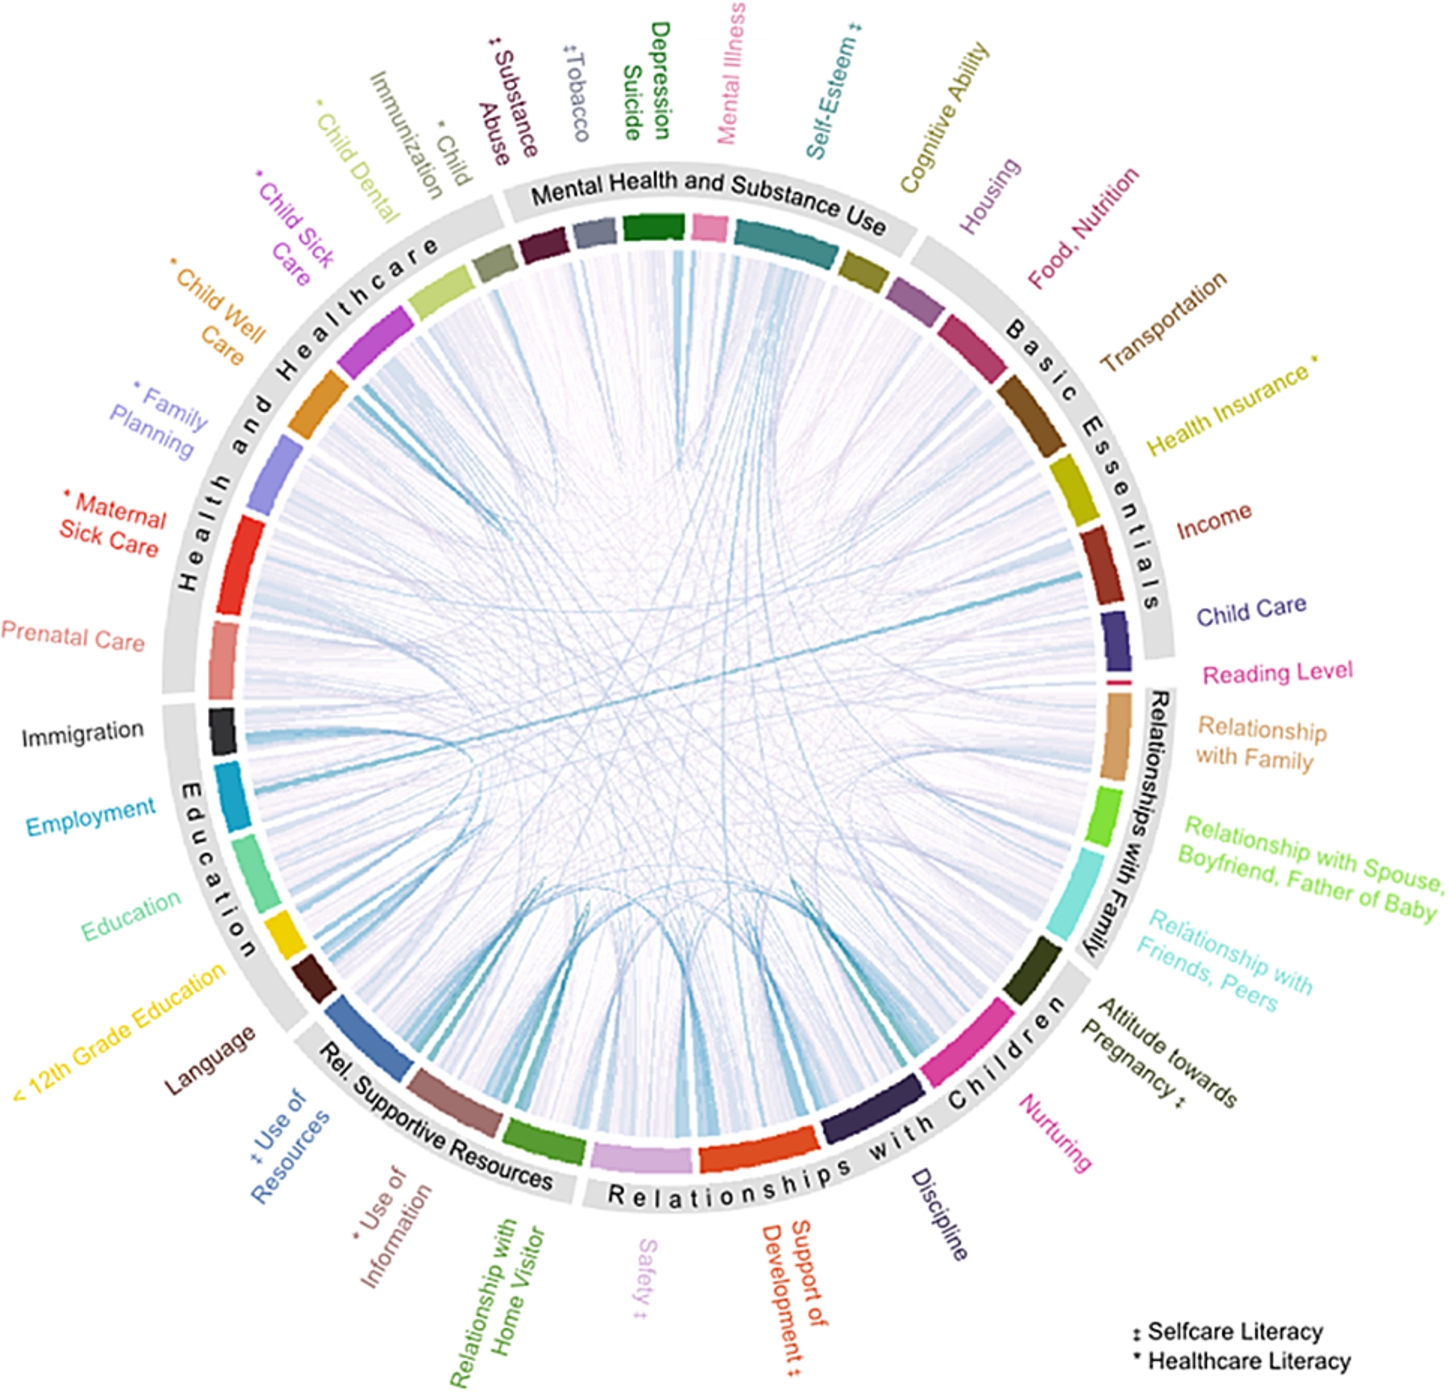 Web of interaction. The Bonferroni-pairwise correlations mapped in a chord diagram highlight the complexity of health literacy concepts through their relationships with each other. The chord diagram draws a link for each significant pairwise correlation. The relative width of the colored bar representing each LSP item is proportional to the number of correlations with that item; a wider bar indicates the item has more correlations and/or stronger correlations than an item with a narrower bar.